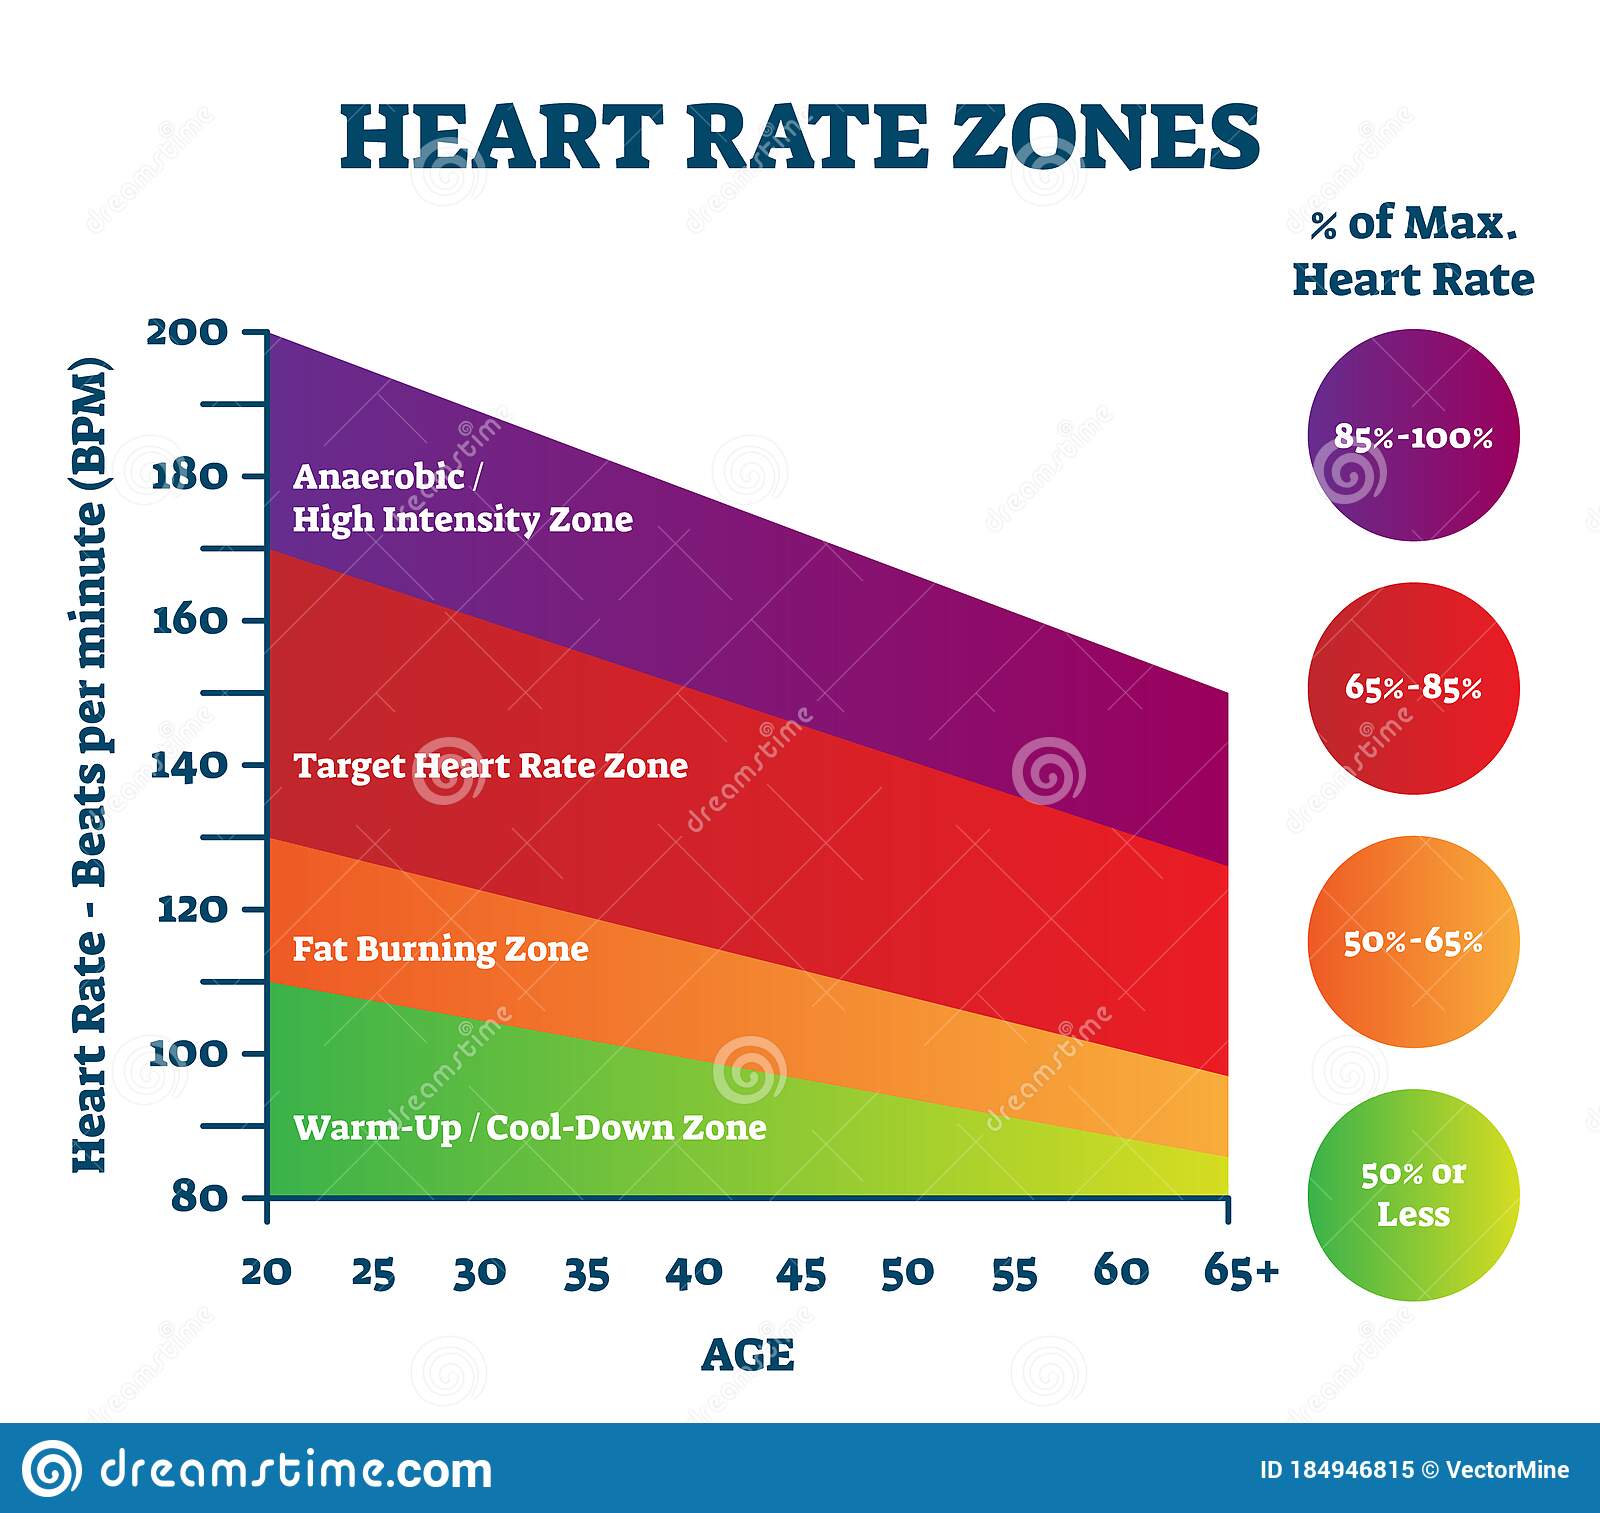 70ä»¥ä¸ max heart rate zone 211099